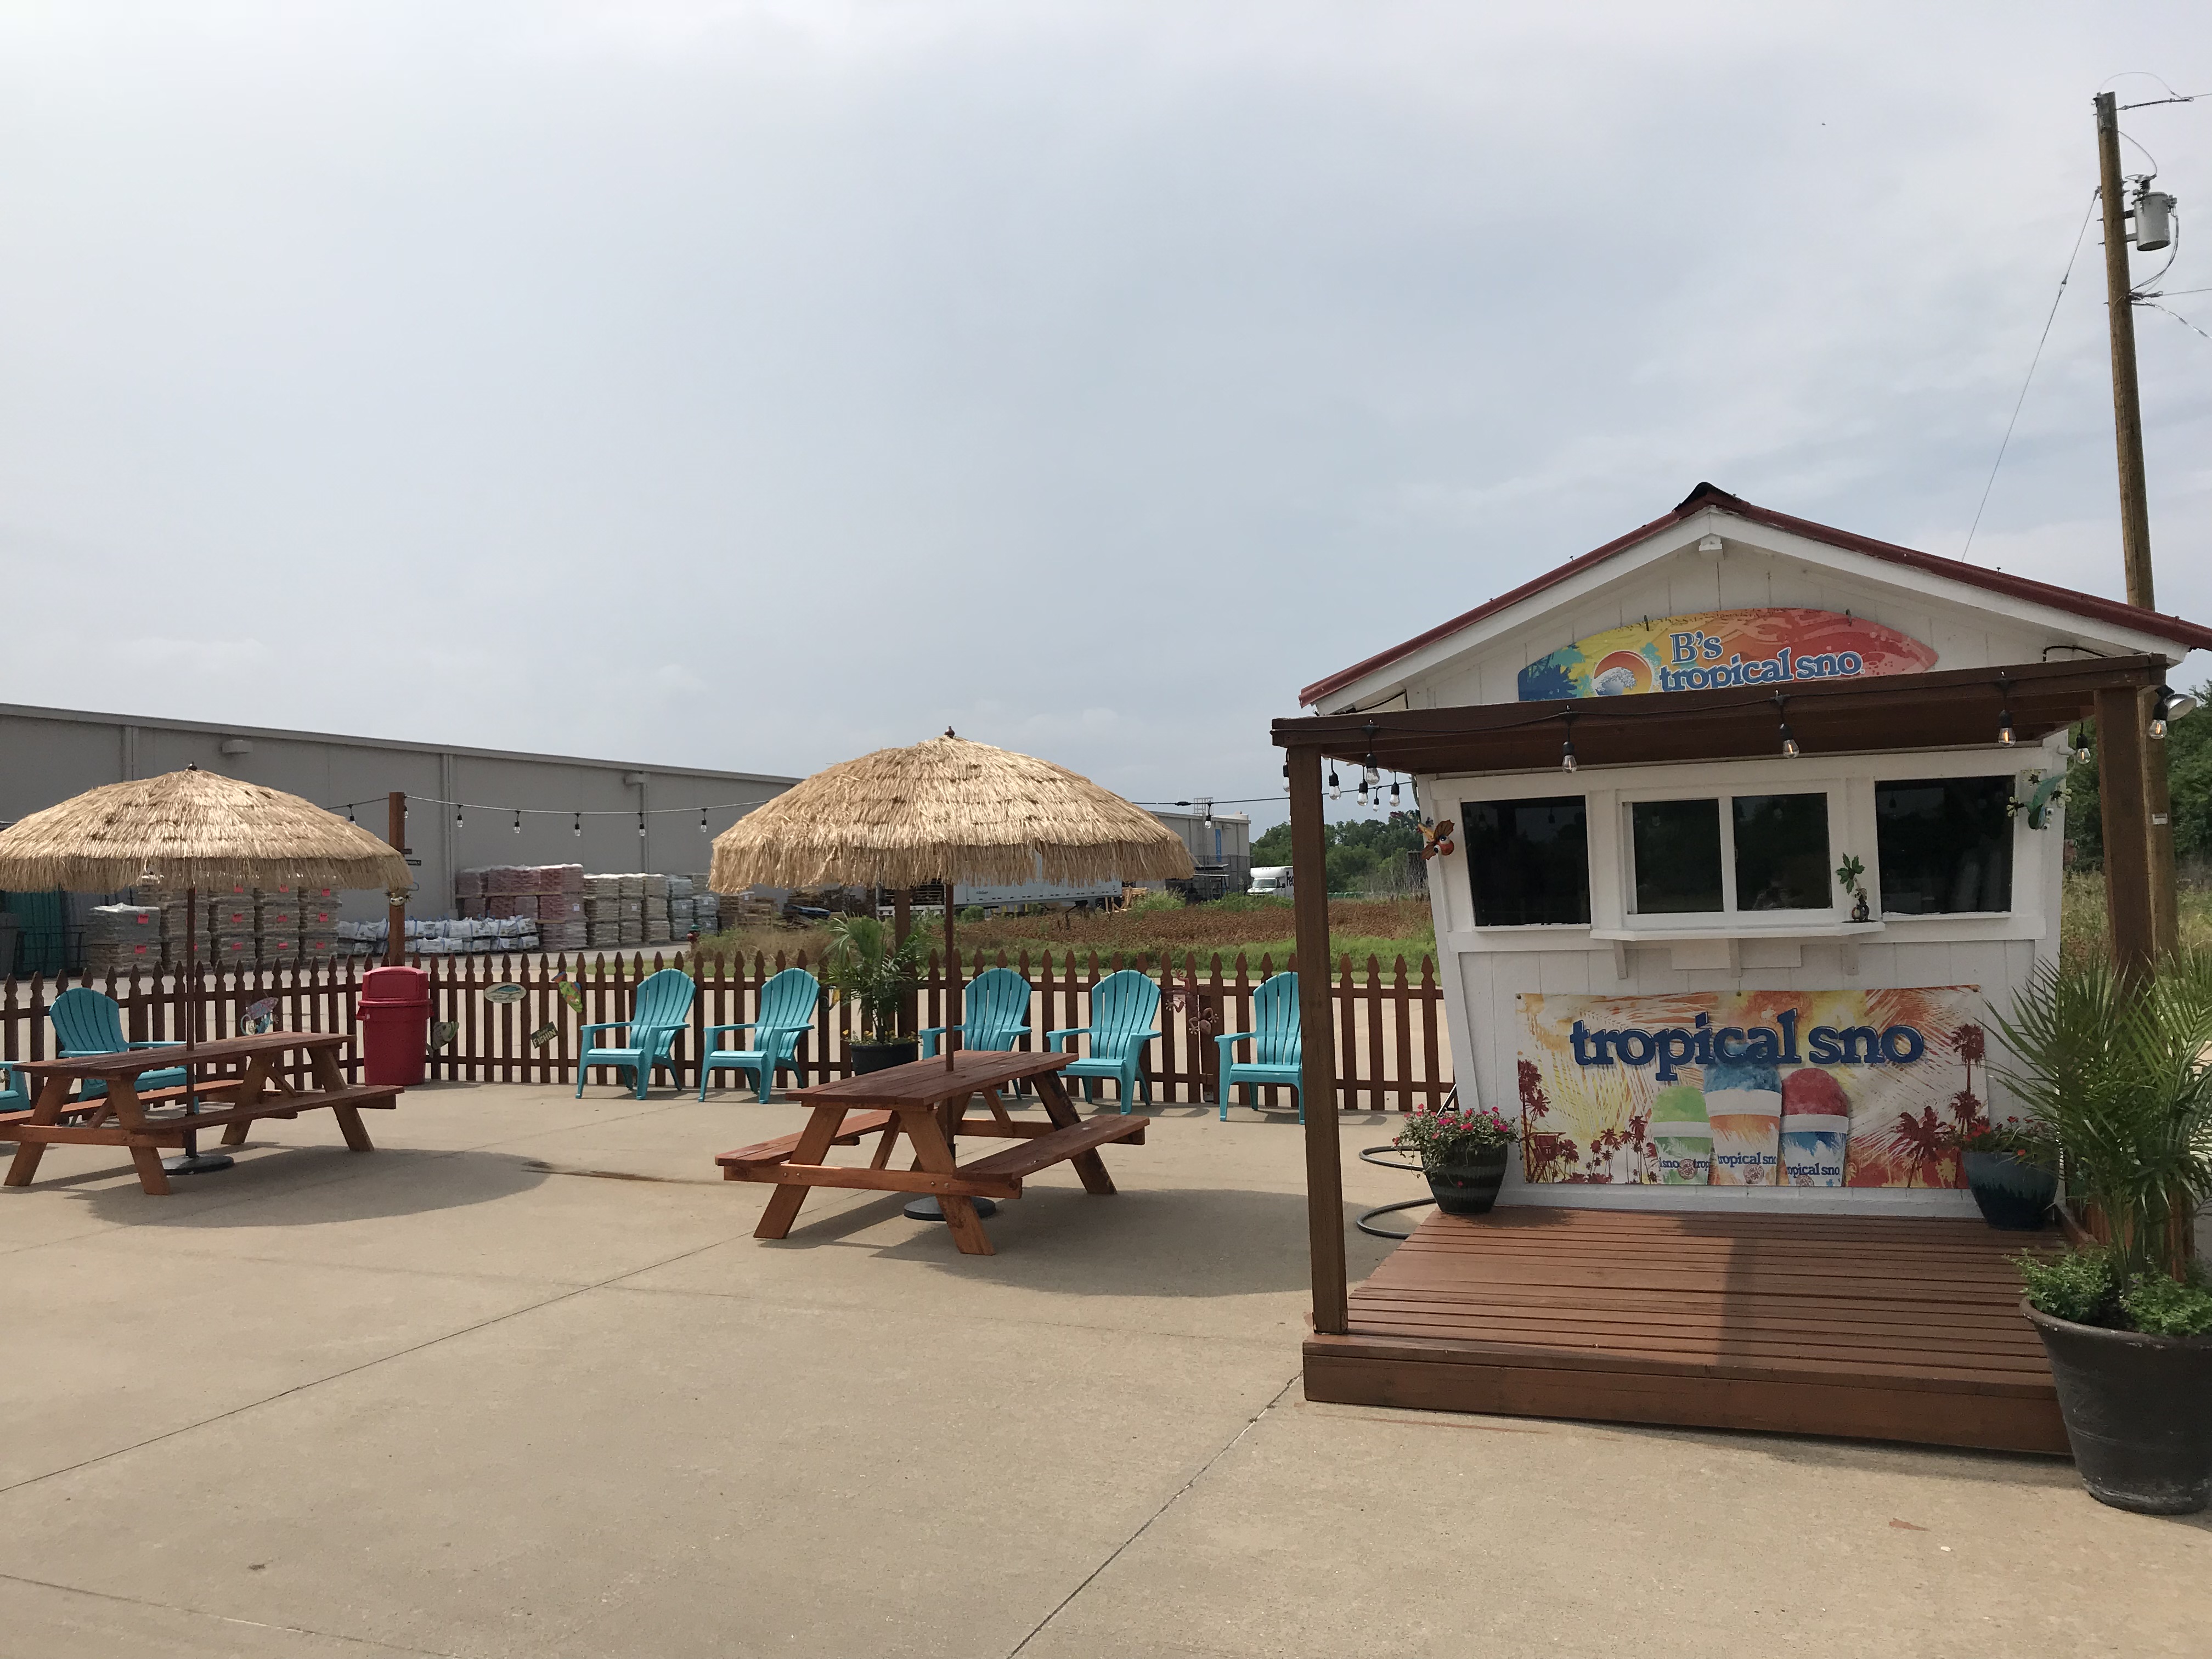 Today’s Forecast Calls for Sno: Tropical Sno’s New Wildcat Way Location Opens at Noon Today